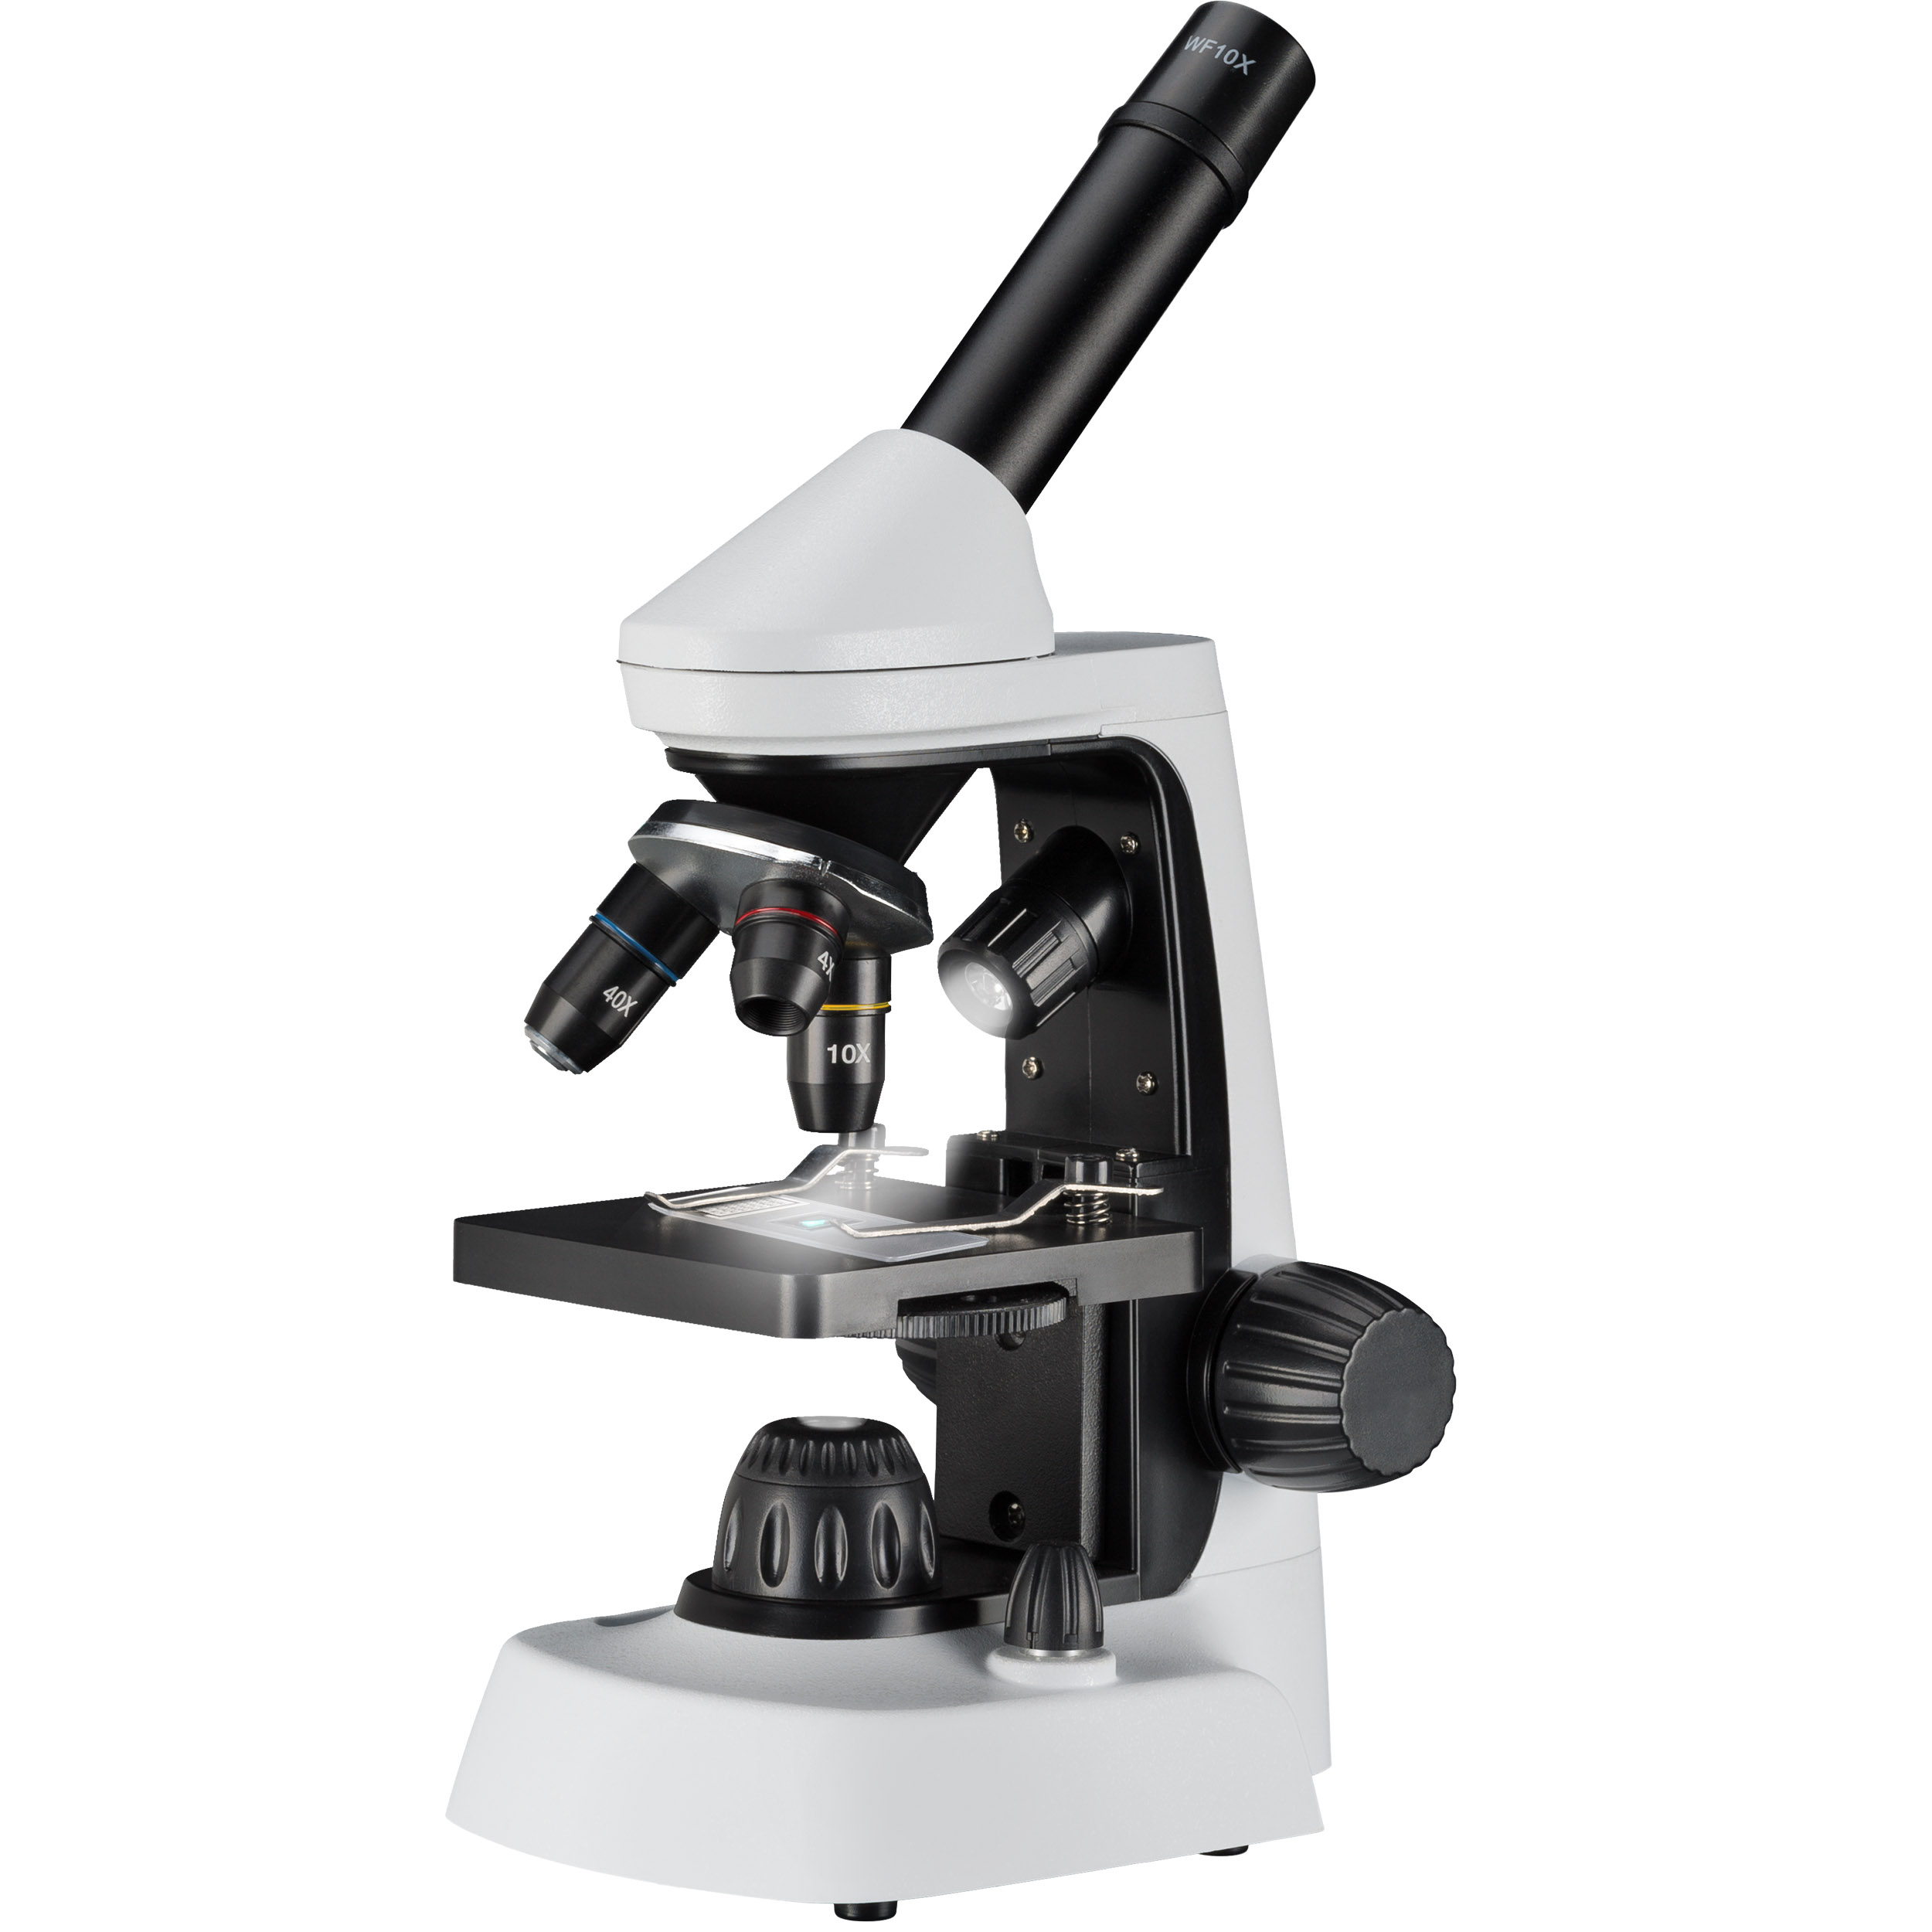 BRESSER JUNIOR Microscope with Magnification 40x-2000x